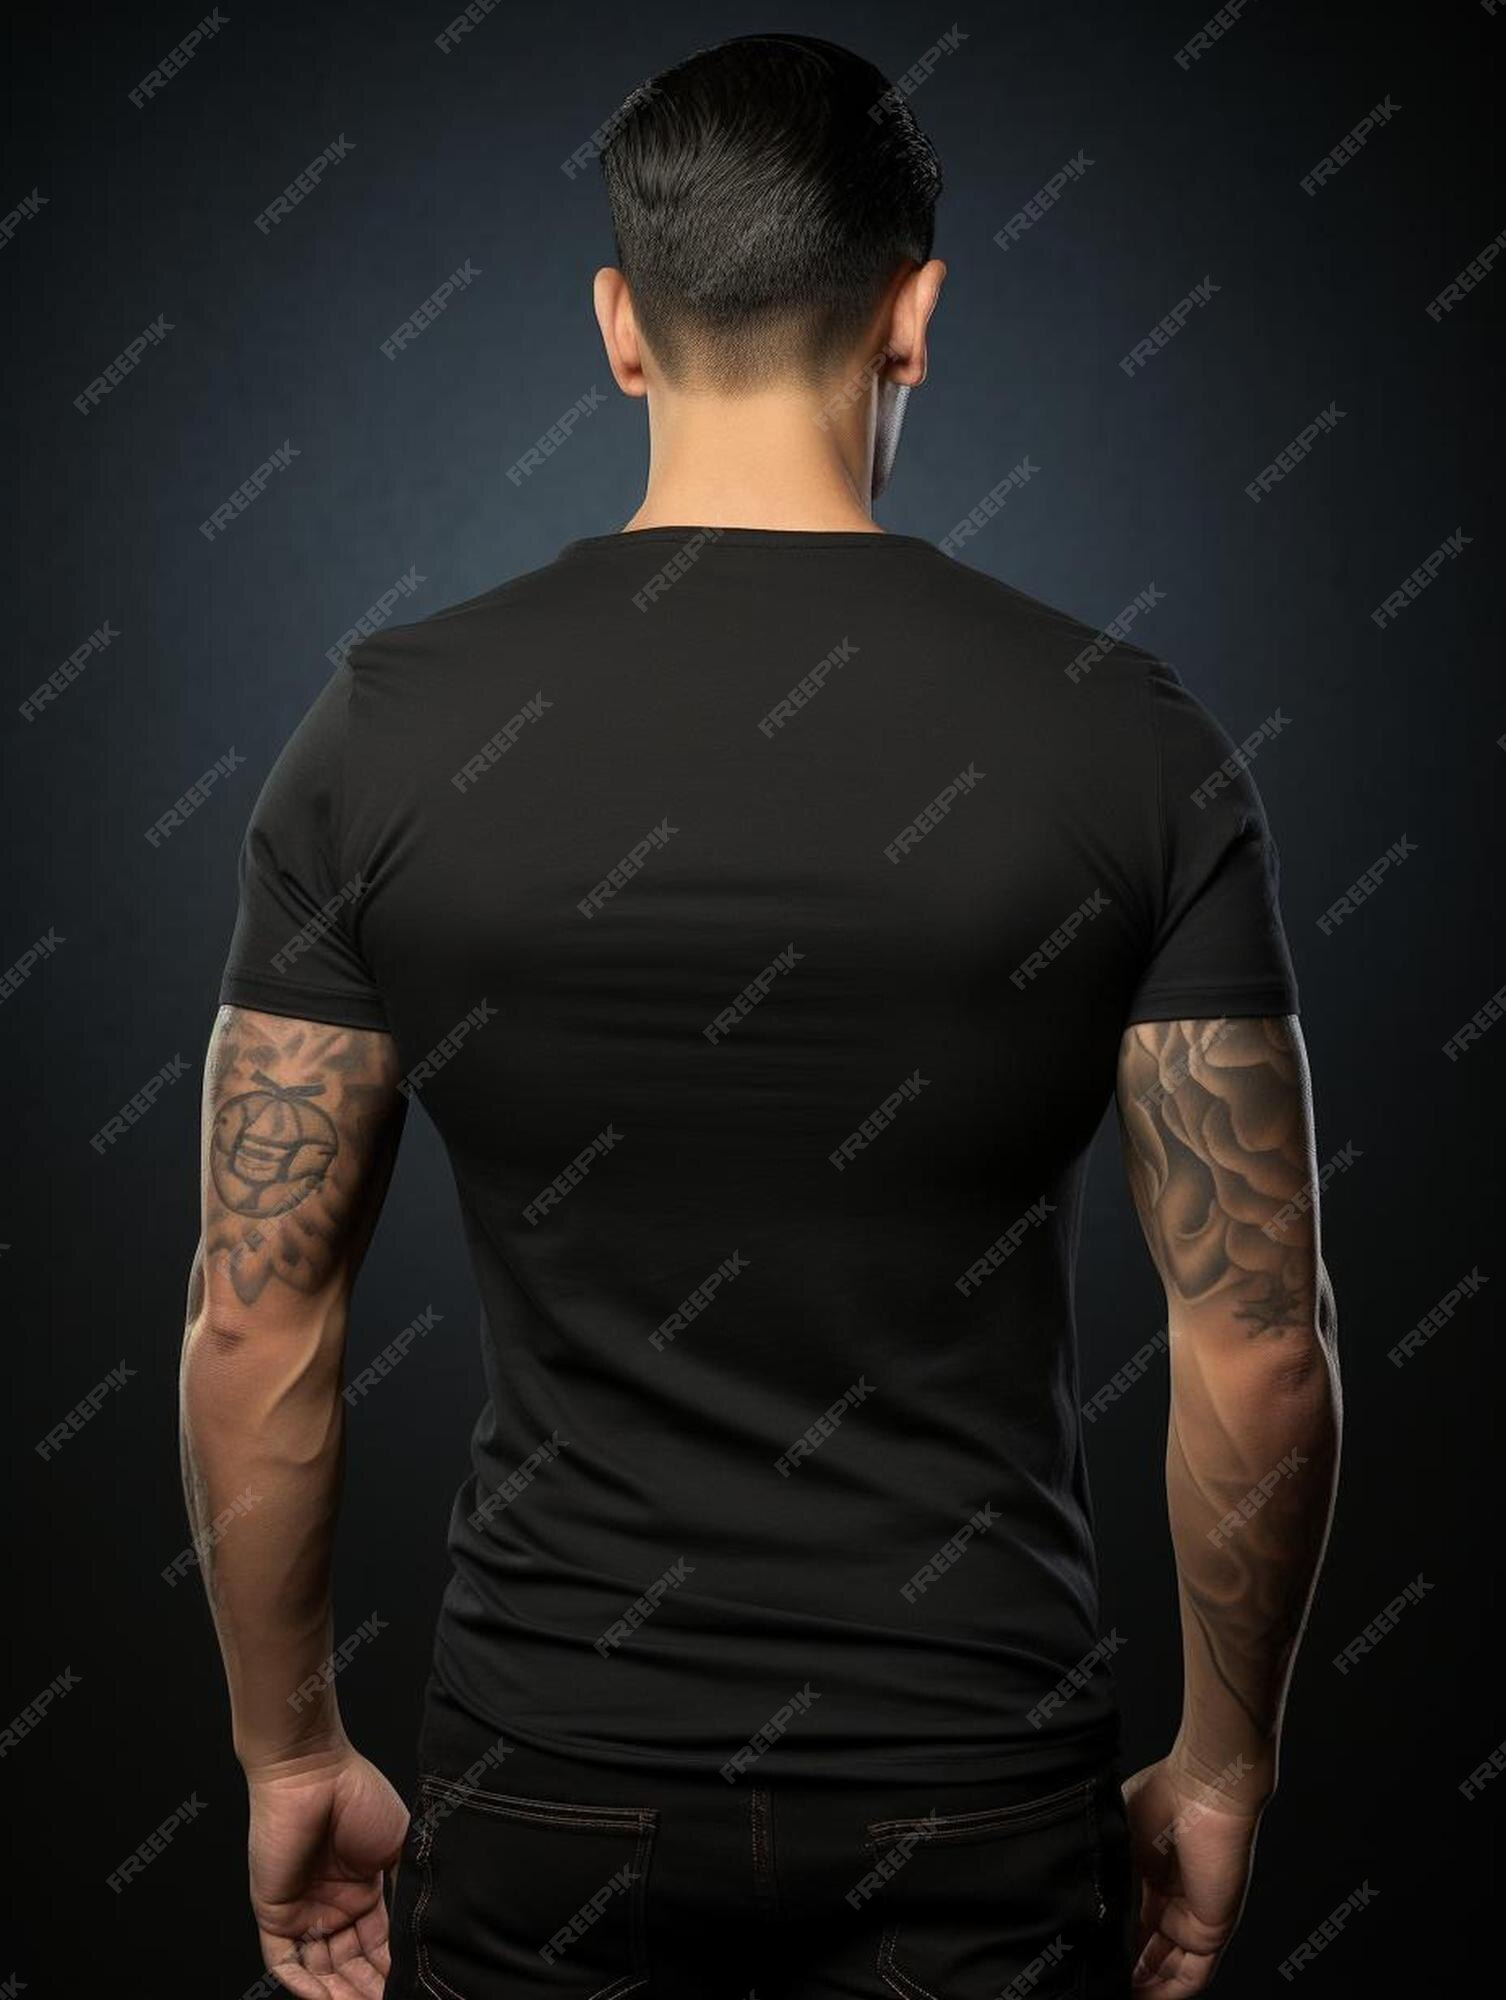 Premium AI Image | a man with tattoos on his back is wearing a black ...